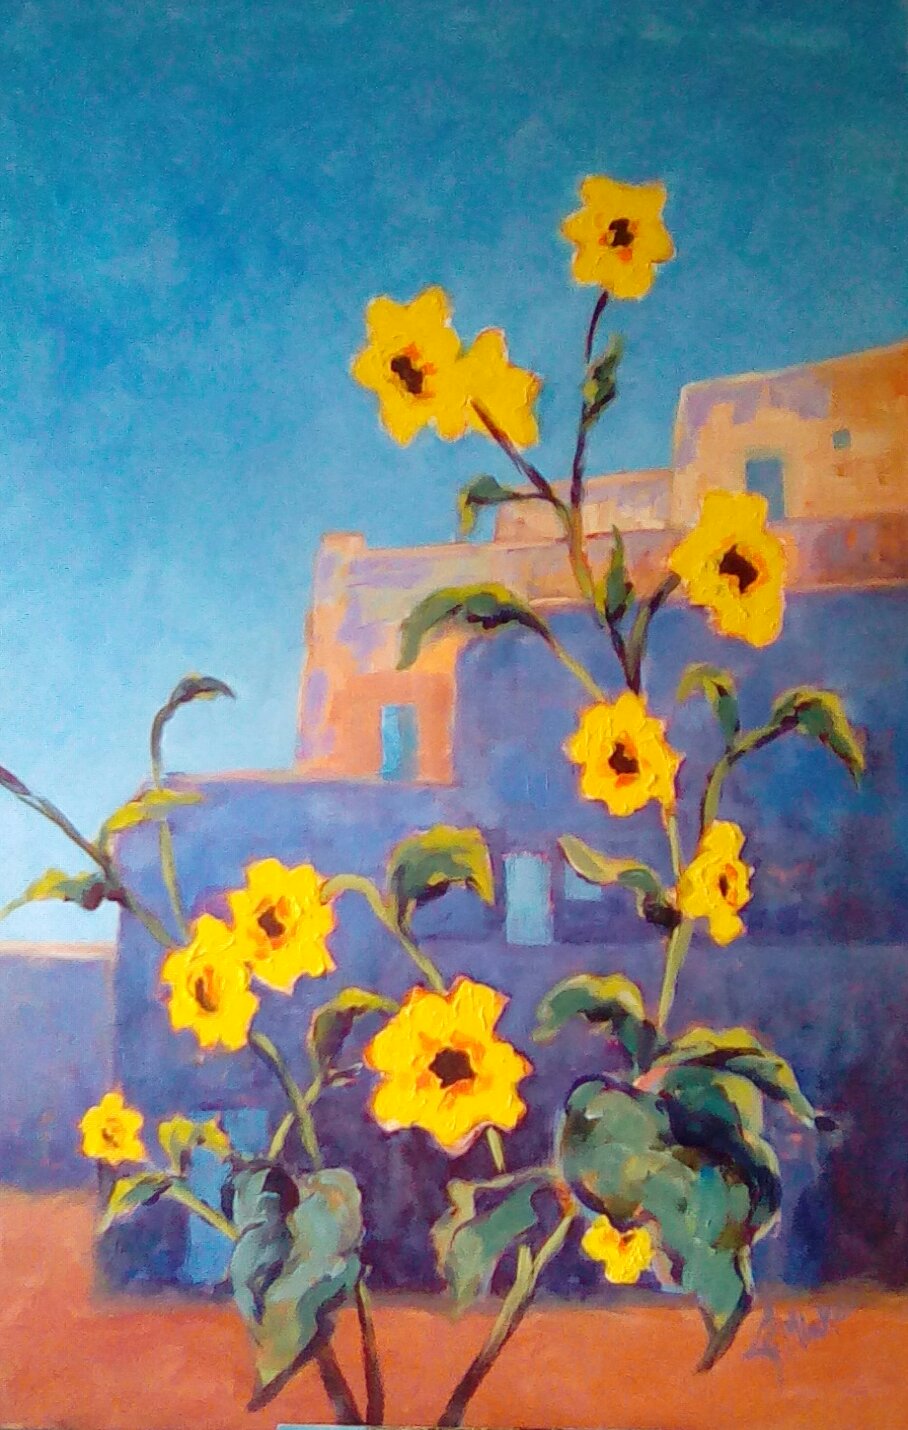 A painting of sunflowers in front of pueblo buildings